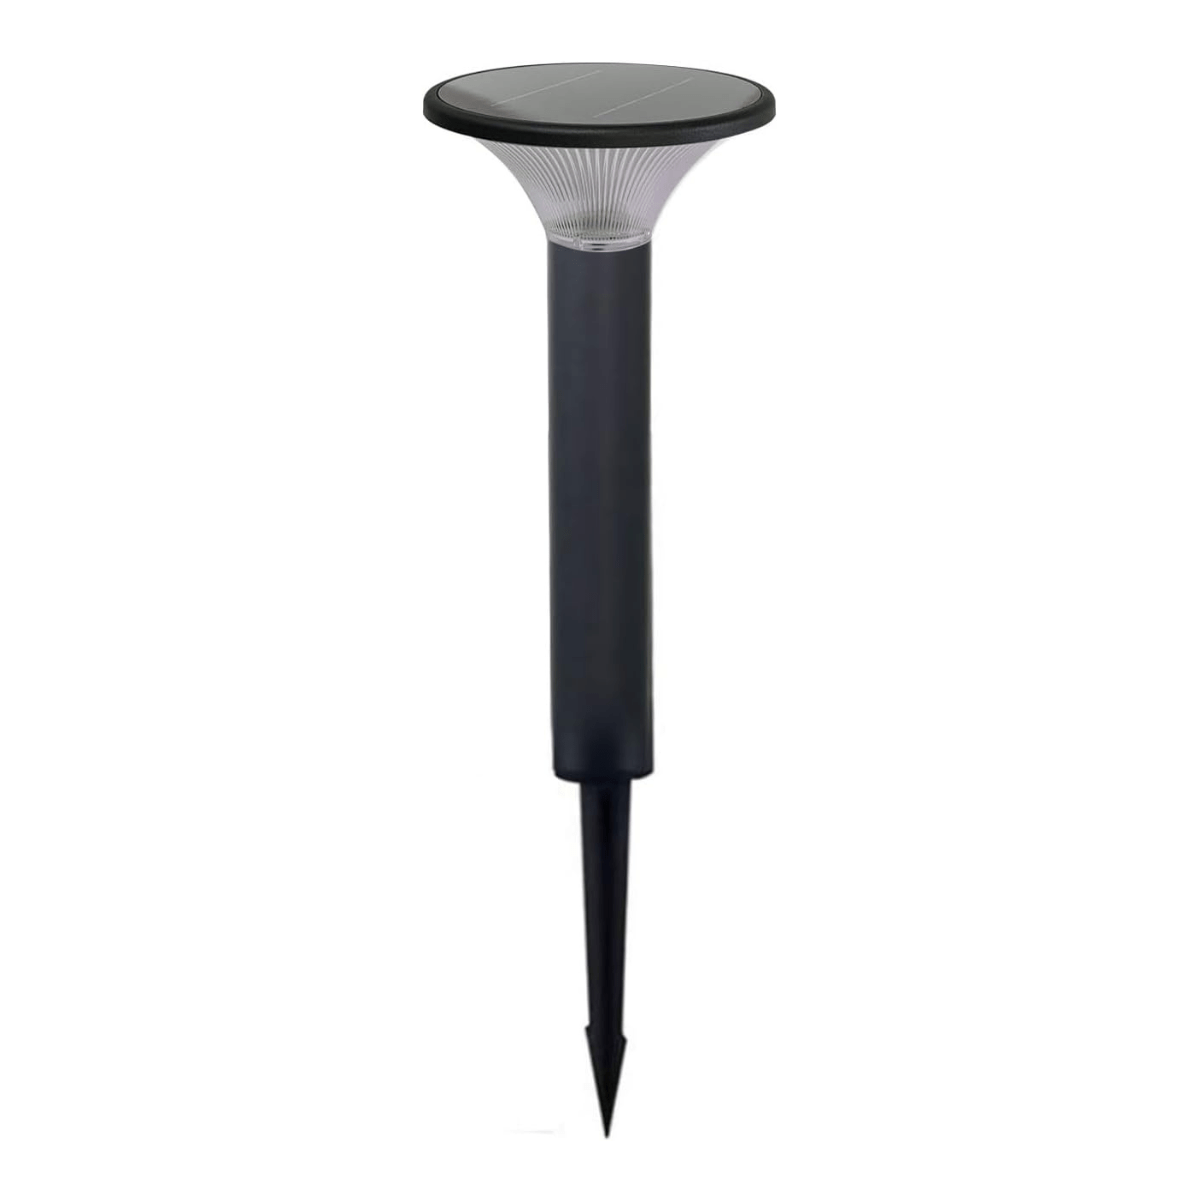 Buy Waterproof Aluminum LED Garden Lawn Solar Pole Light 7W - SG-2 | Shop at Supply Master Accra, Ghana Lamps & Lightings Buy Tools hardware Building materials